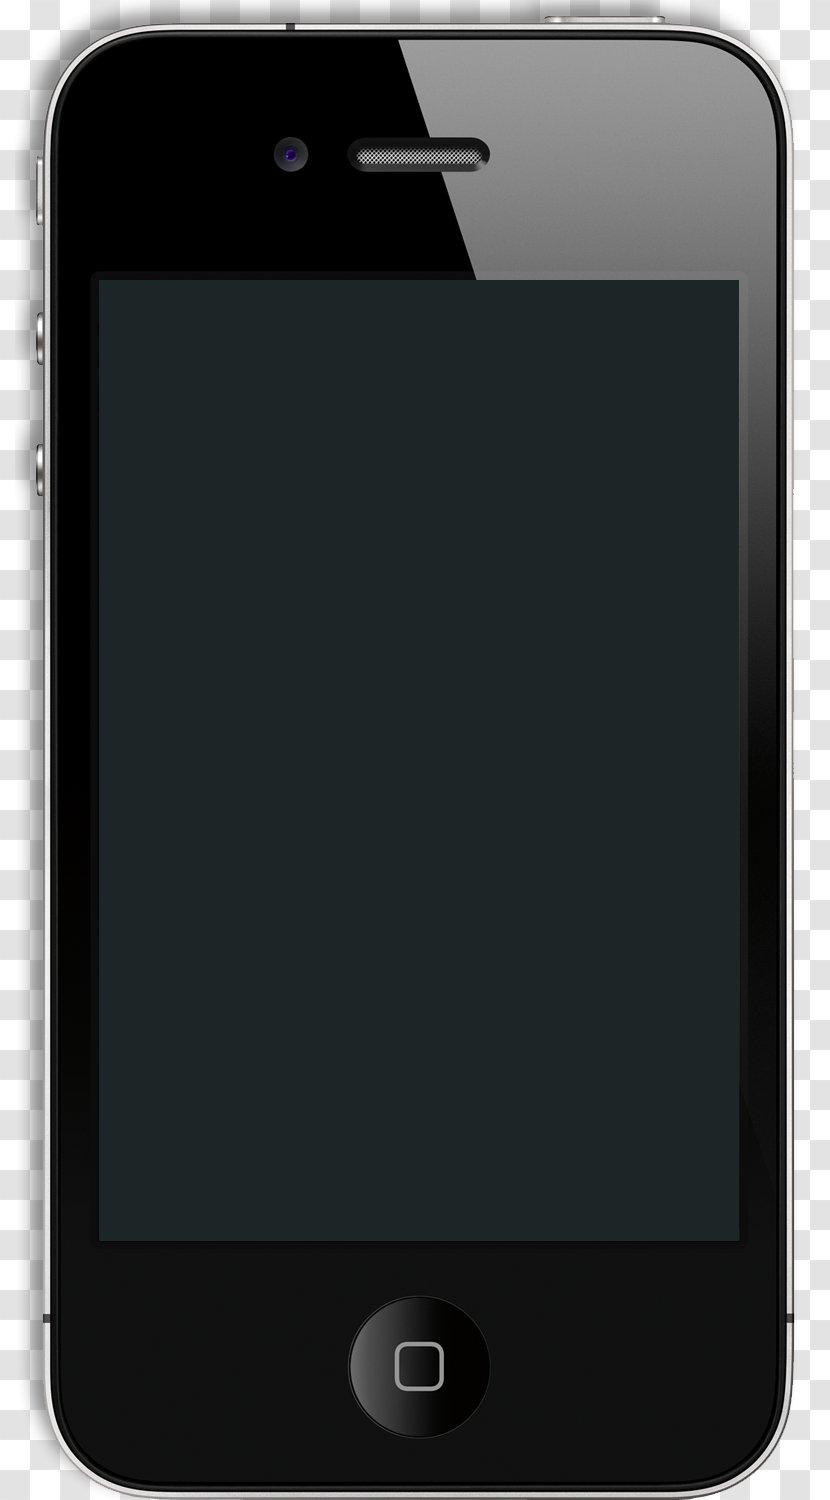 IPhone 4S 5c - Mobile Phone - Iphone Frame Transparent PNG